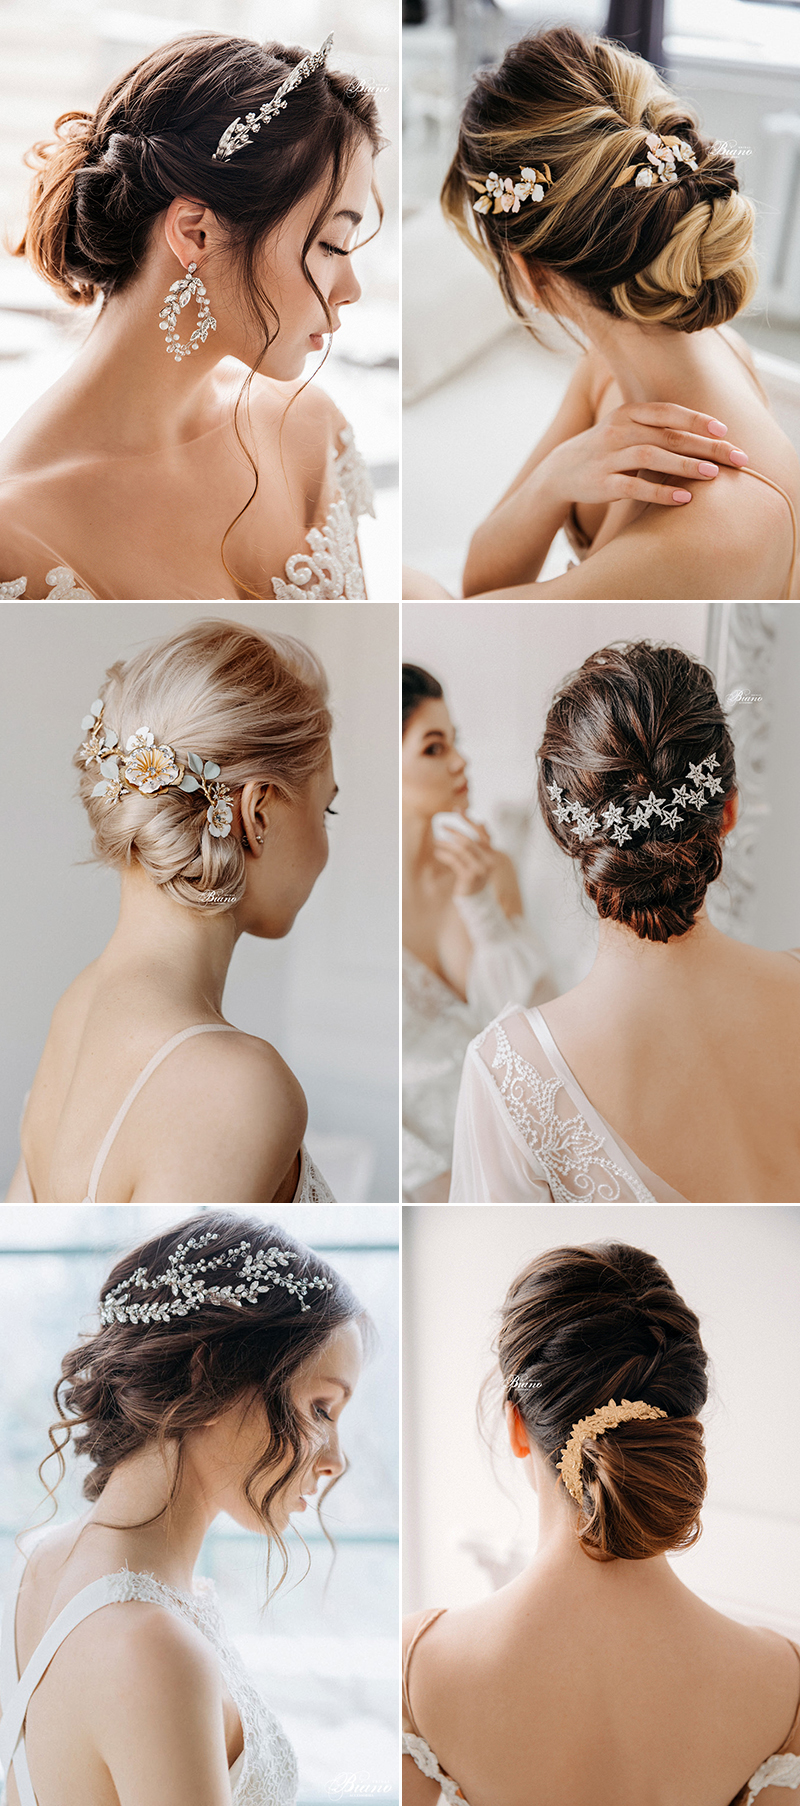 23 Gorgeous Bridal Hair Accessories For Every Wedding hairstyle! - Praise  Wedding